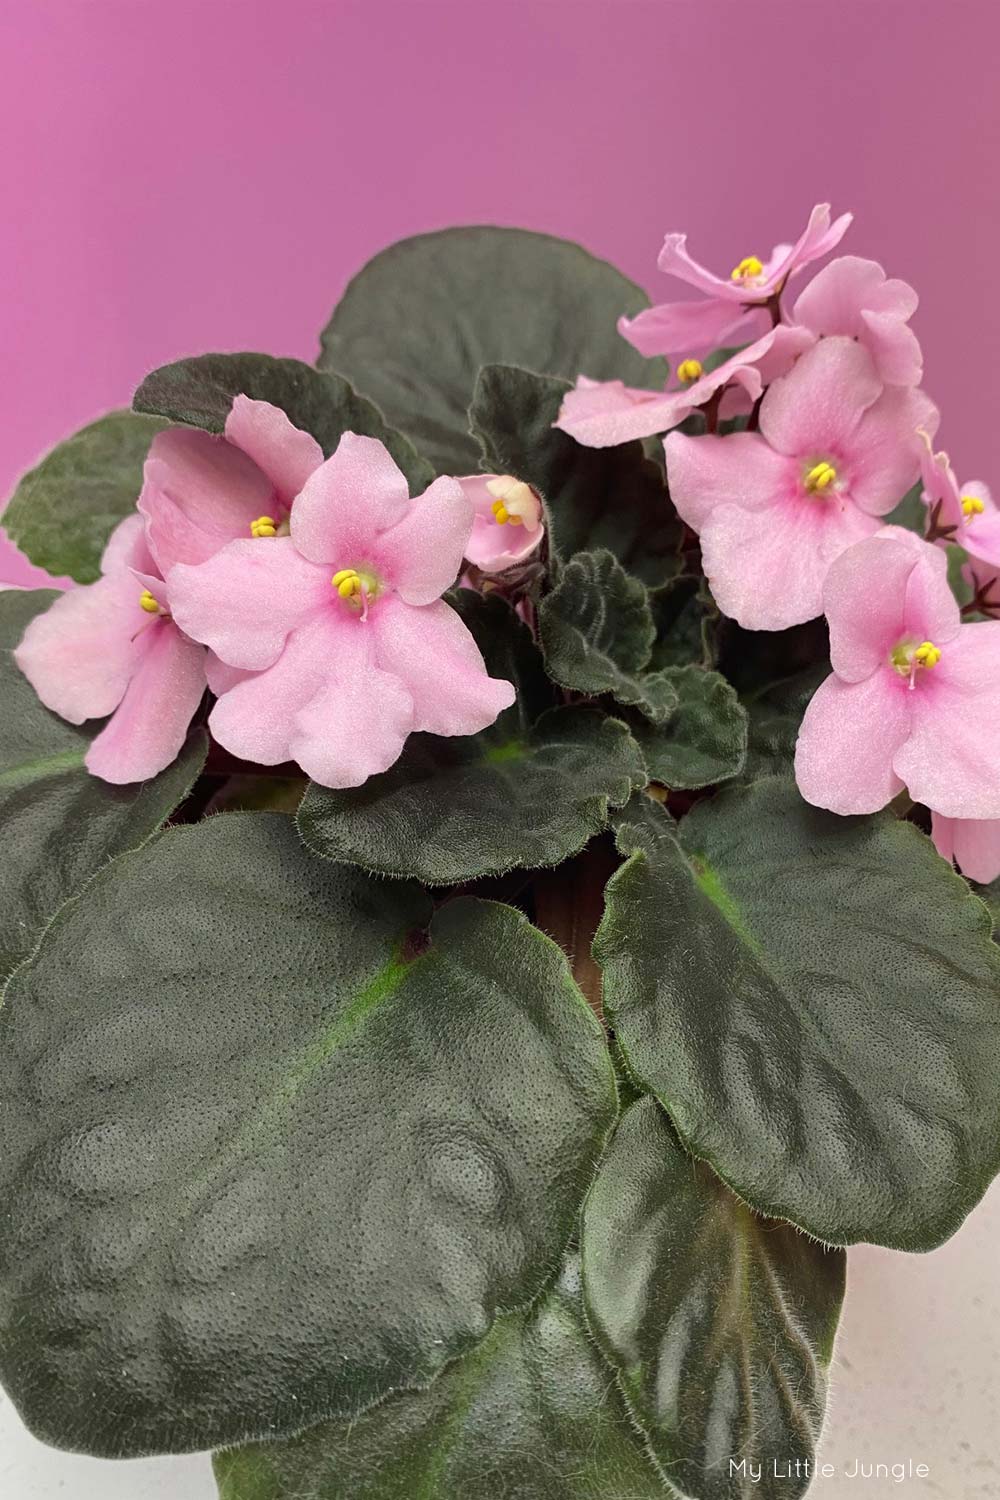 How to get an African violet to bloom